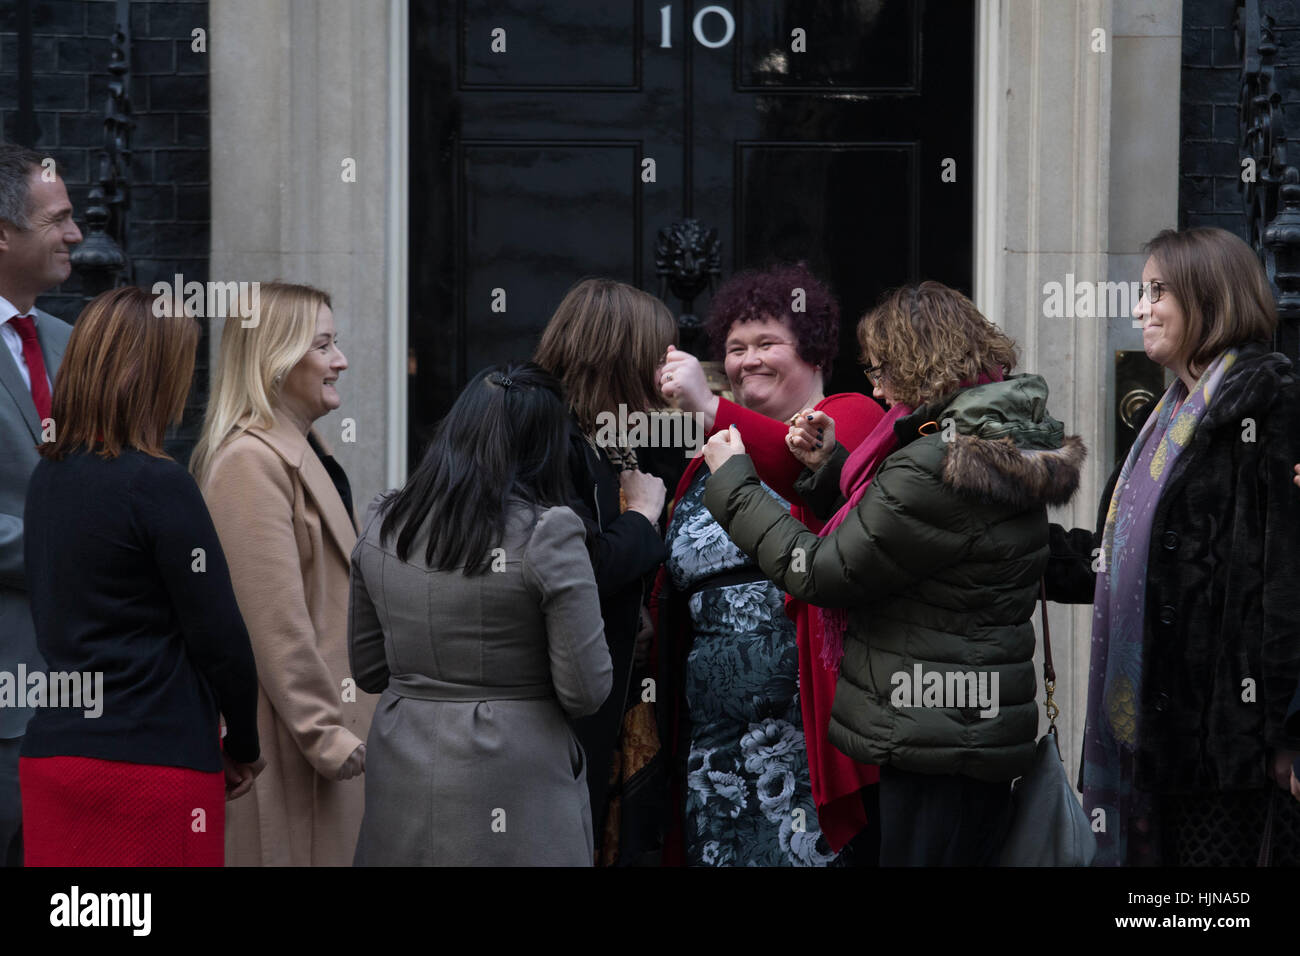 Claire Throssell, whose children were killed by her abusive ex-husband in 2014, hands in petition to Downing Street in London calling for an end to unsafe child contact with dangerous perpetrators of domestic violence. Stock Photo